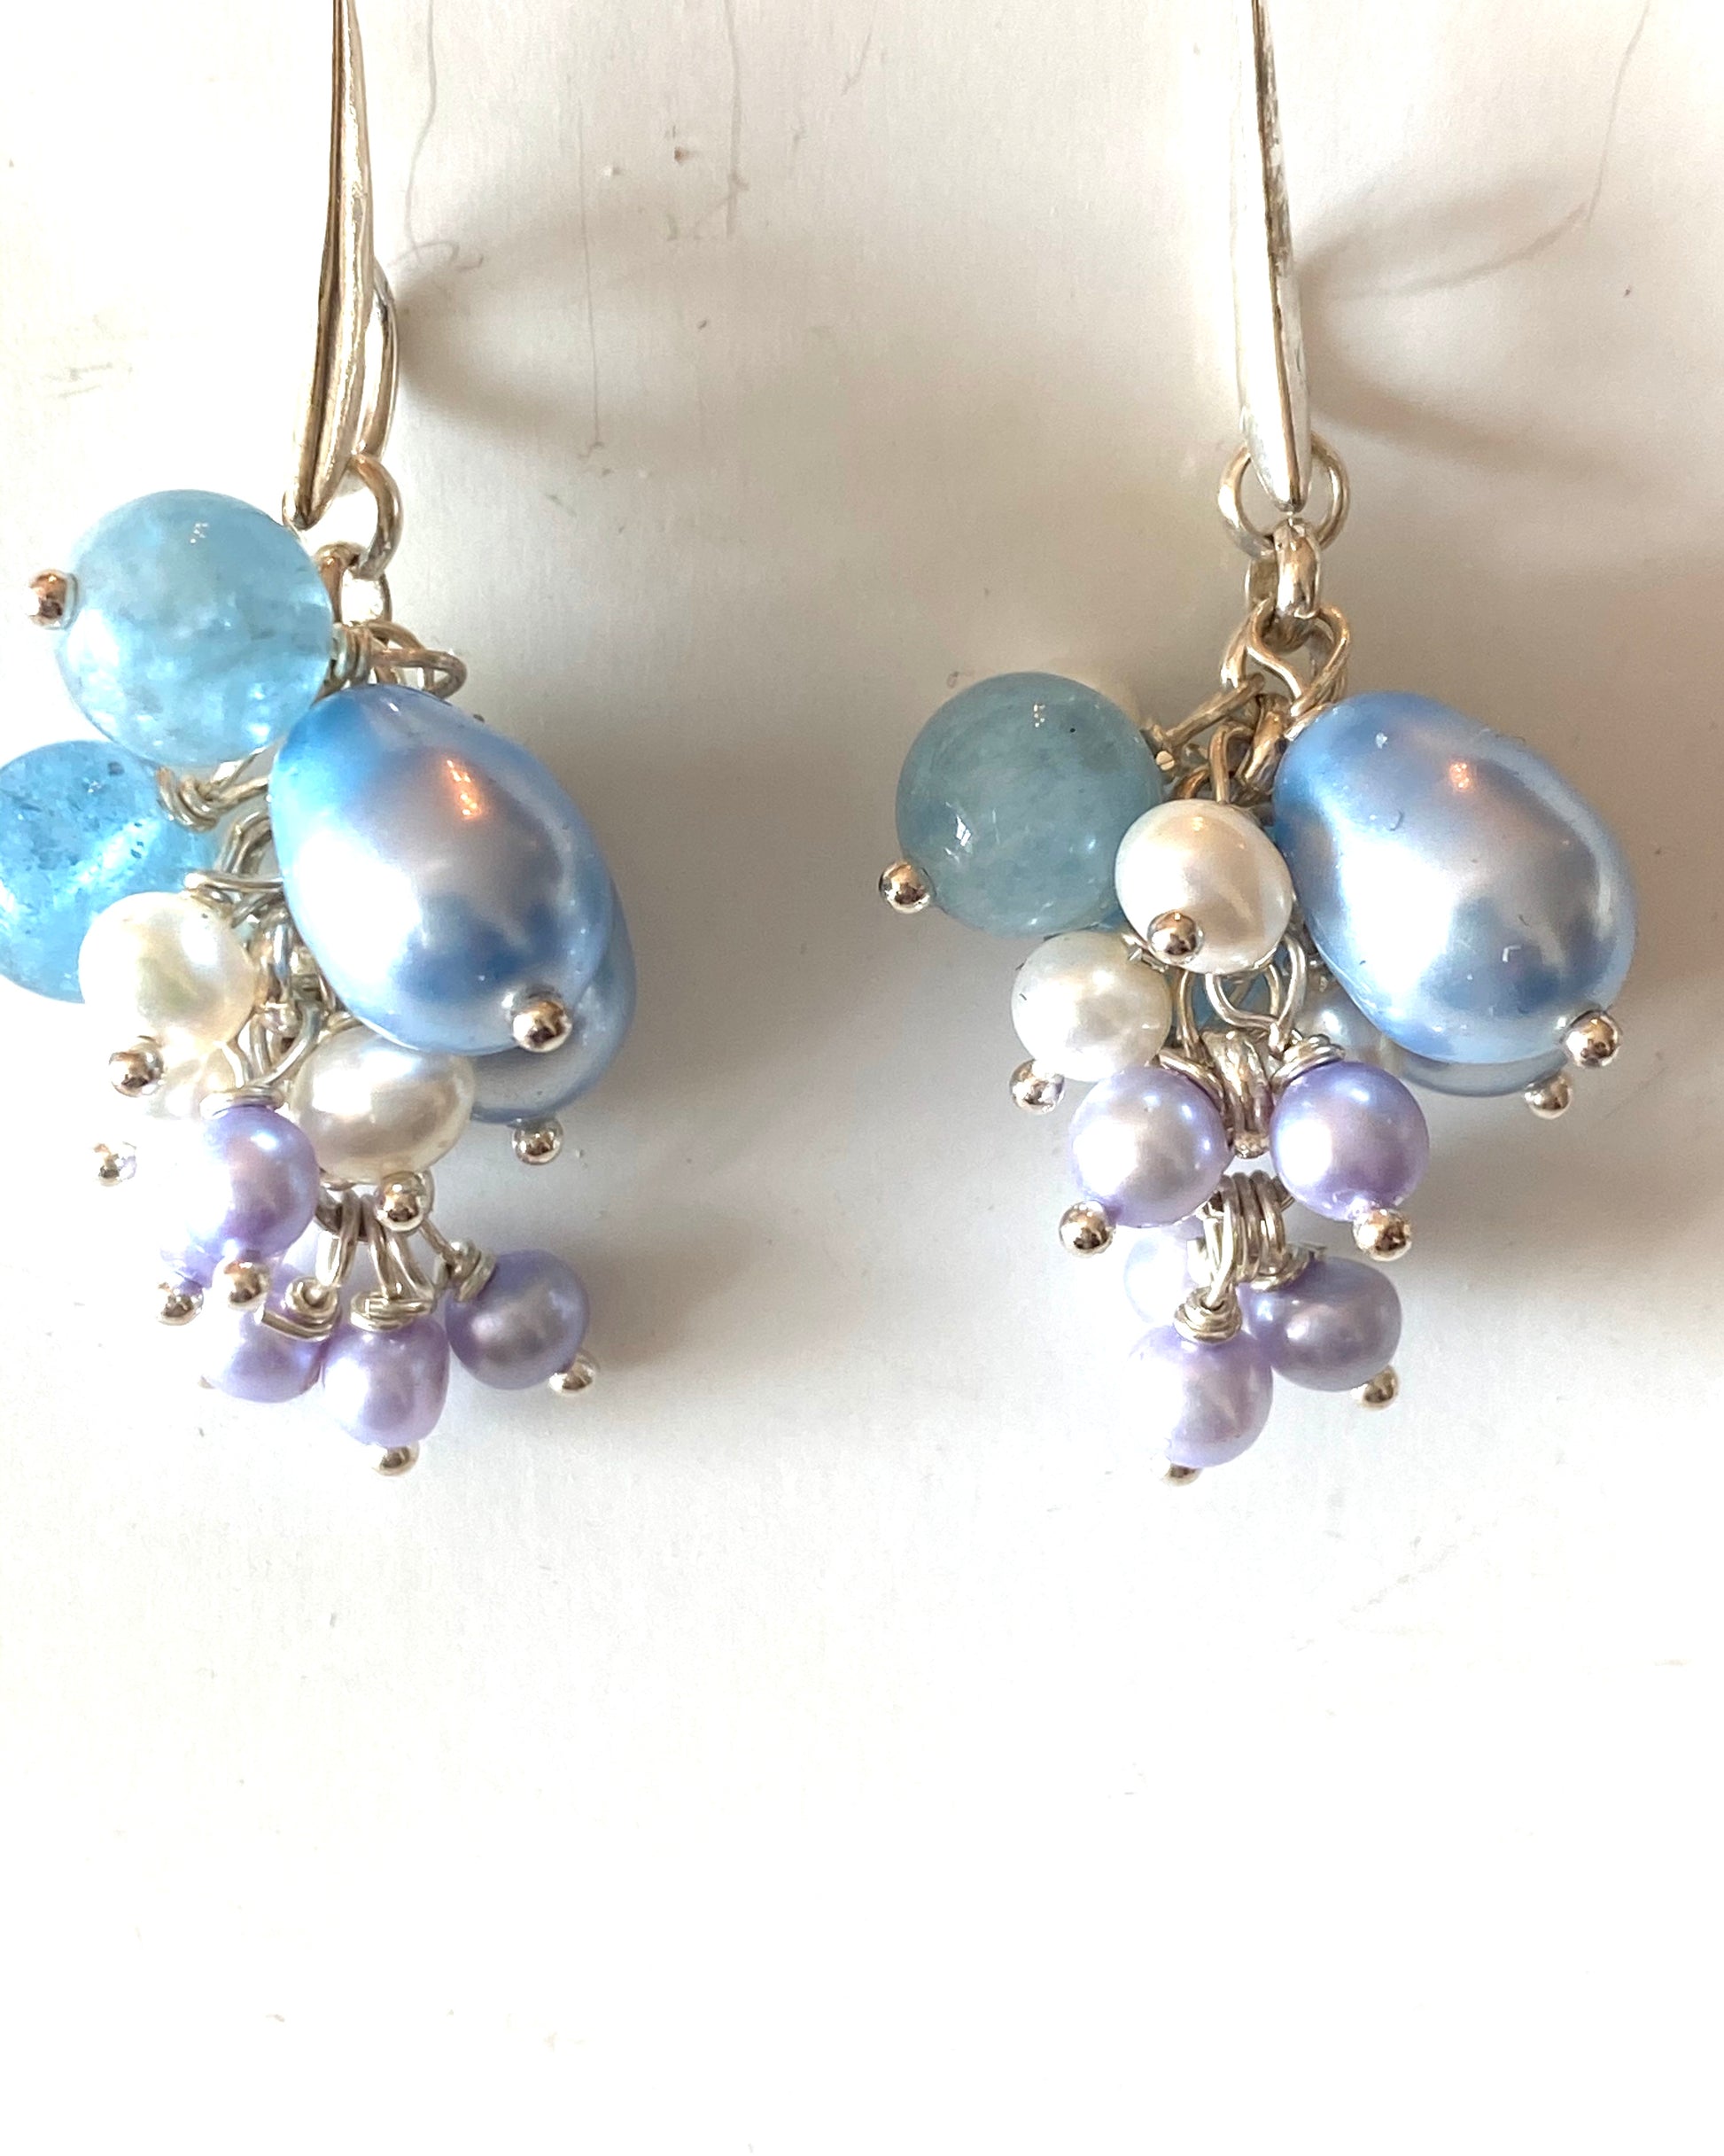 Blue fresh water pearls combined with Blue Swarovski Crystal pearl earrings on Sterling Silver wires